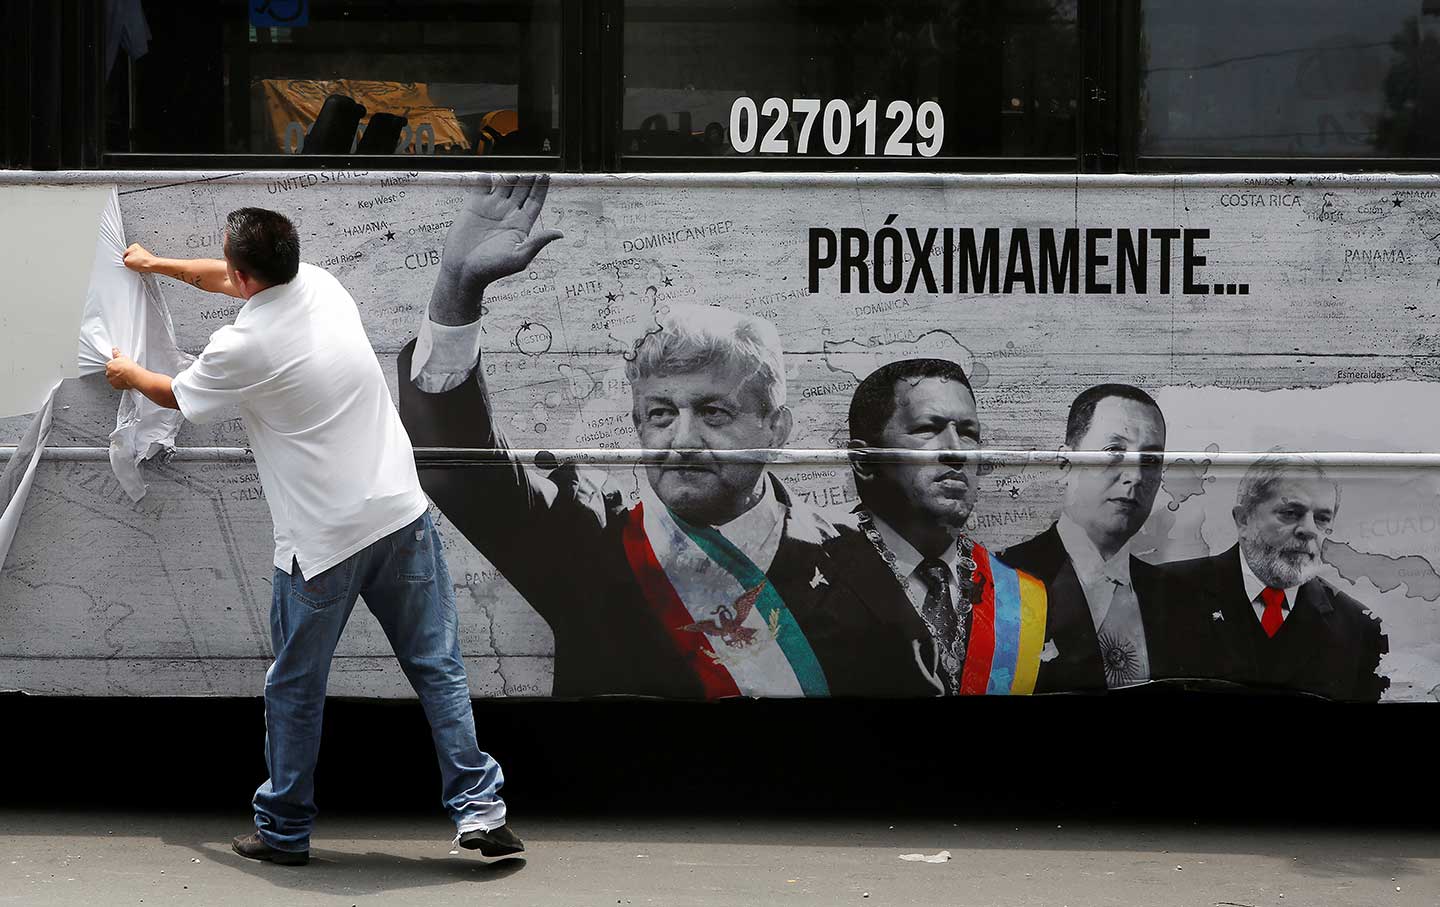 A man tears an advertising campaign featuring leftist front-runner Andres Manuel Lopez Obrador (L) of the National Regeneration Movement (MORENA) alongside Latin American leaders Hugo Chavez and Lula in Mexico City, Mexico April 25, 2018. Photo: REUTERS/Ginnette Riquelme.